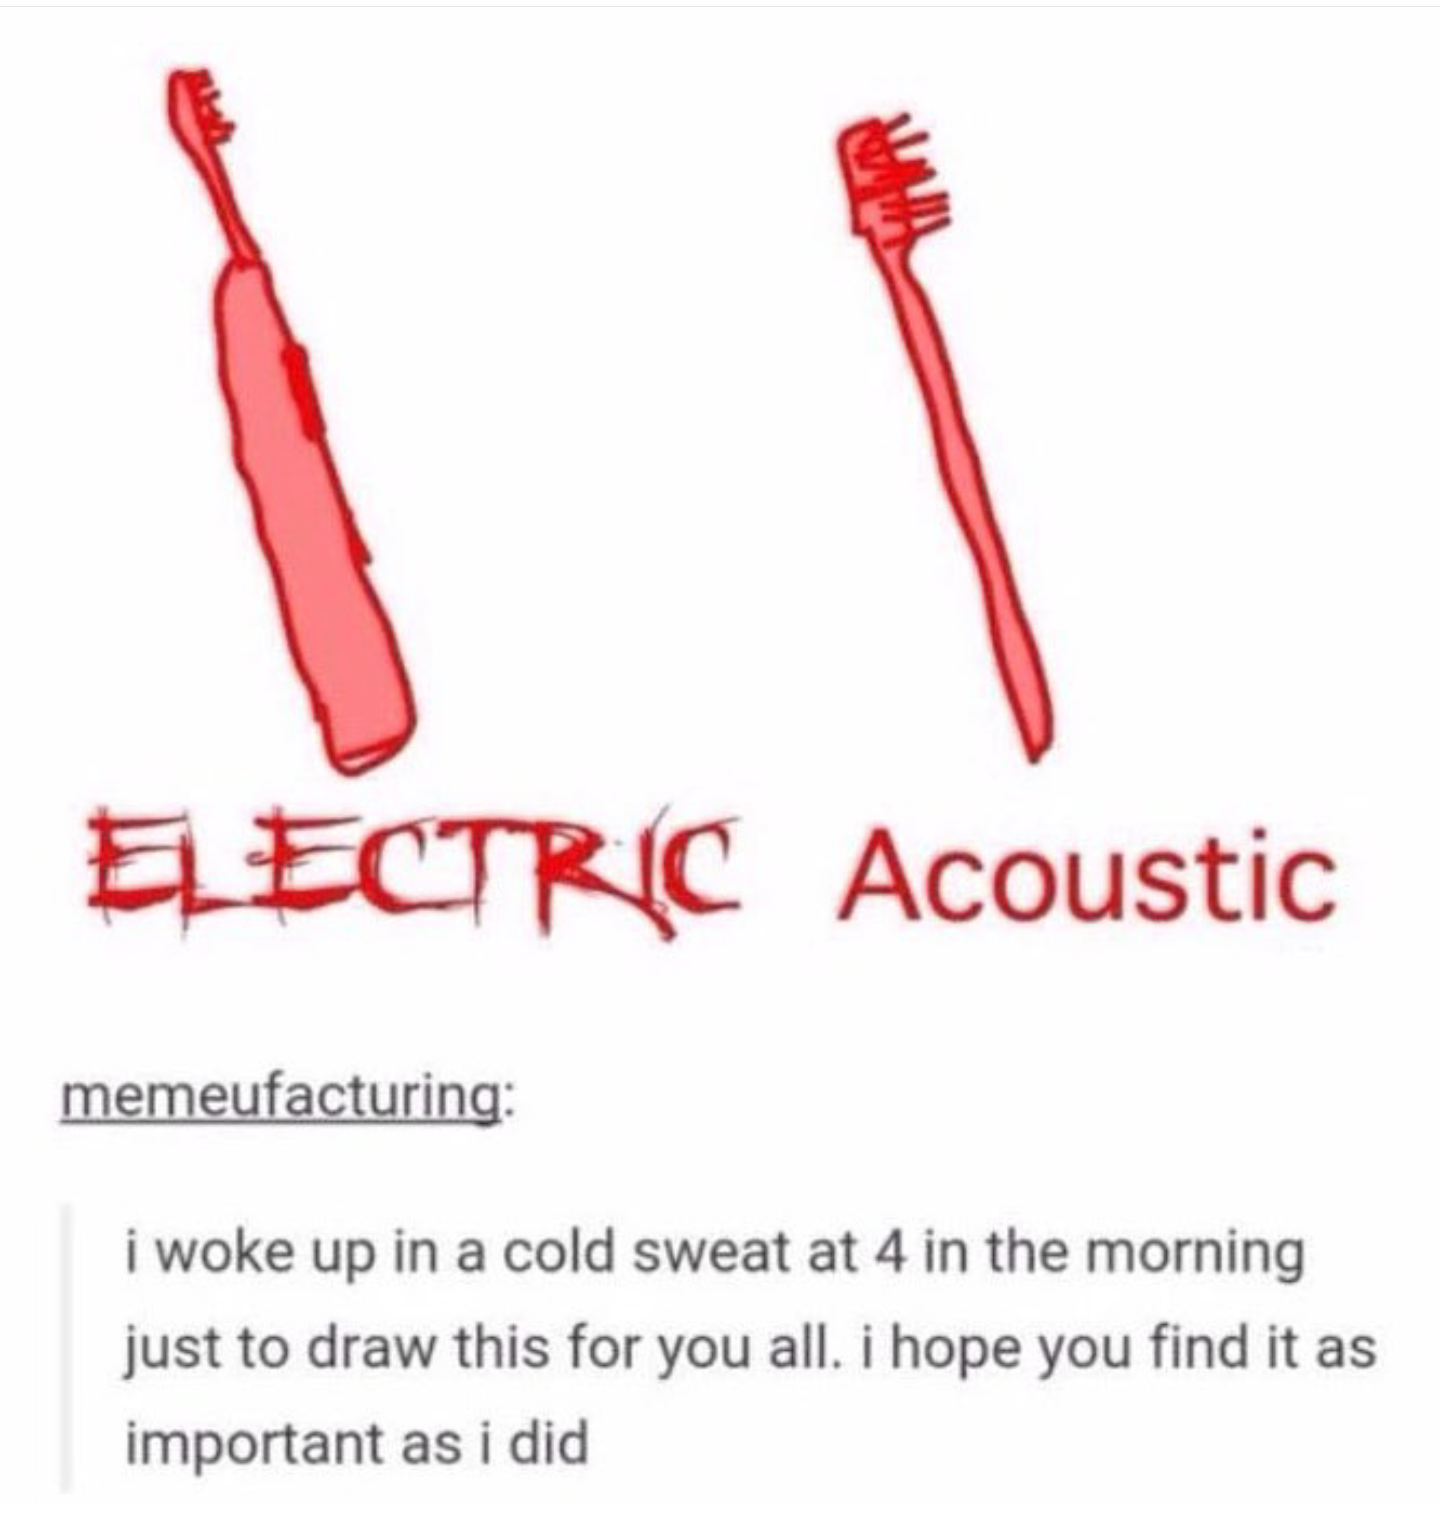 toothbrush - Eectric Acoustic memeufacturing i woke up in a cold sweat at 4 in the morning just to draw this for you all. i hope you find it as important as i did